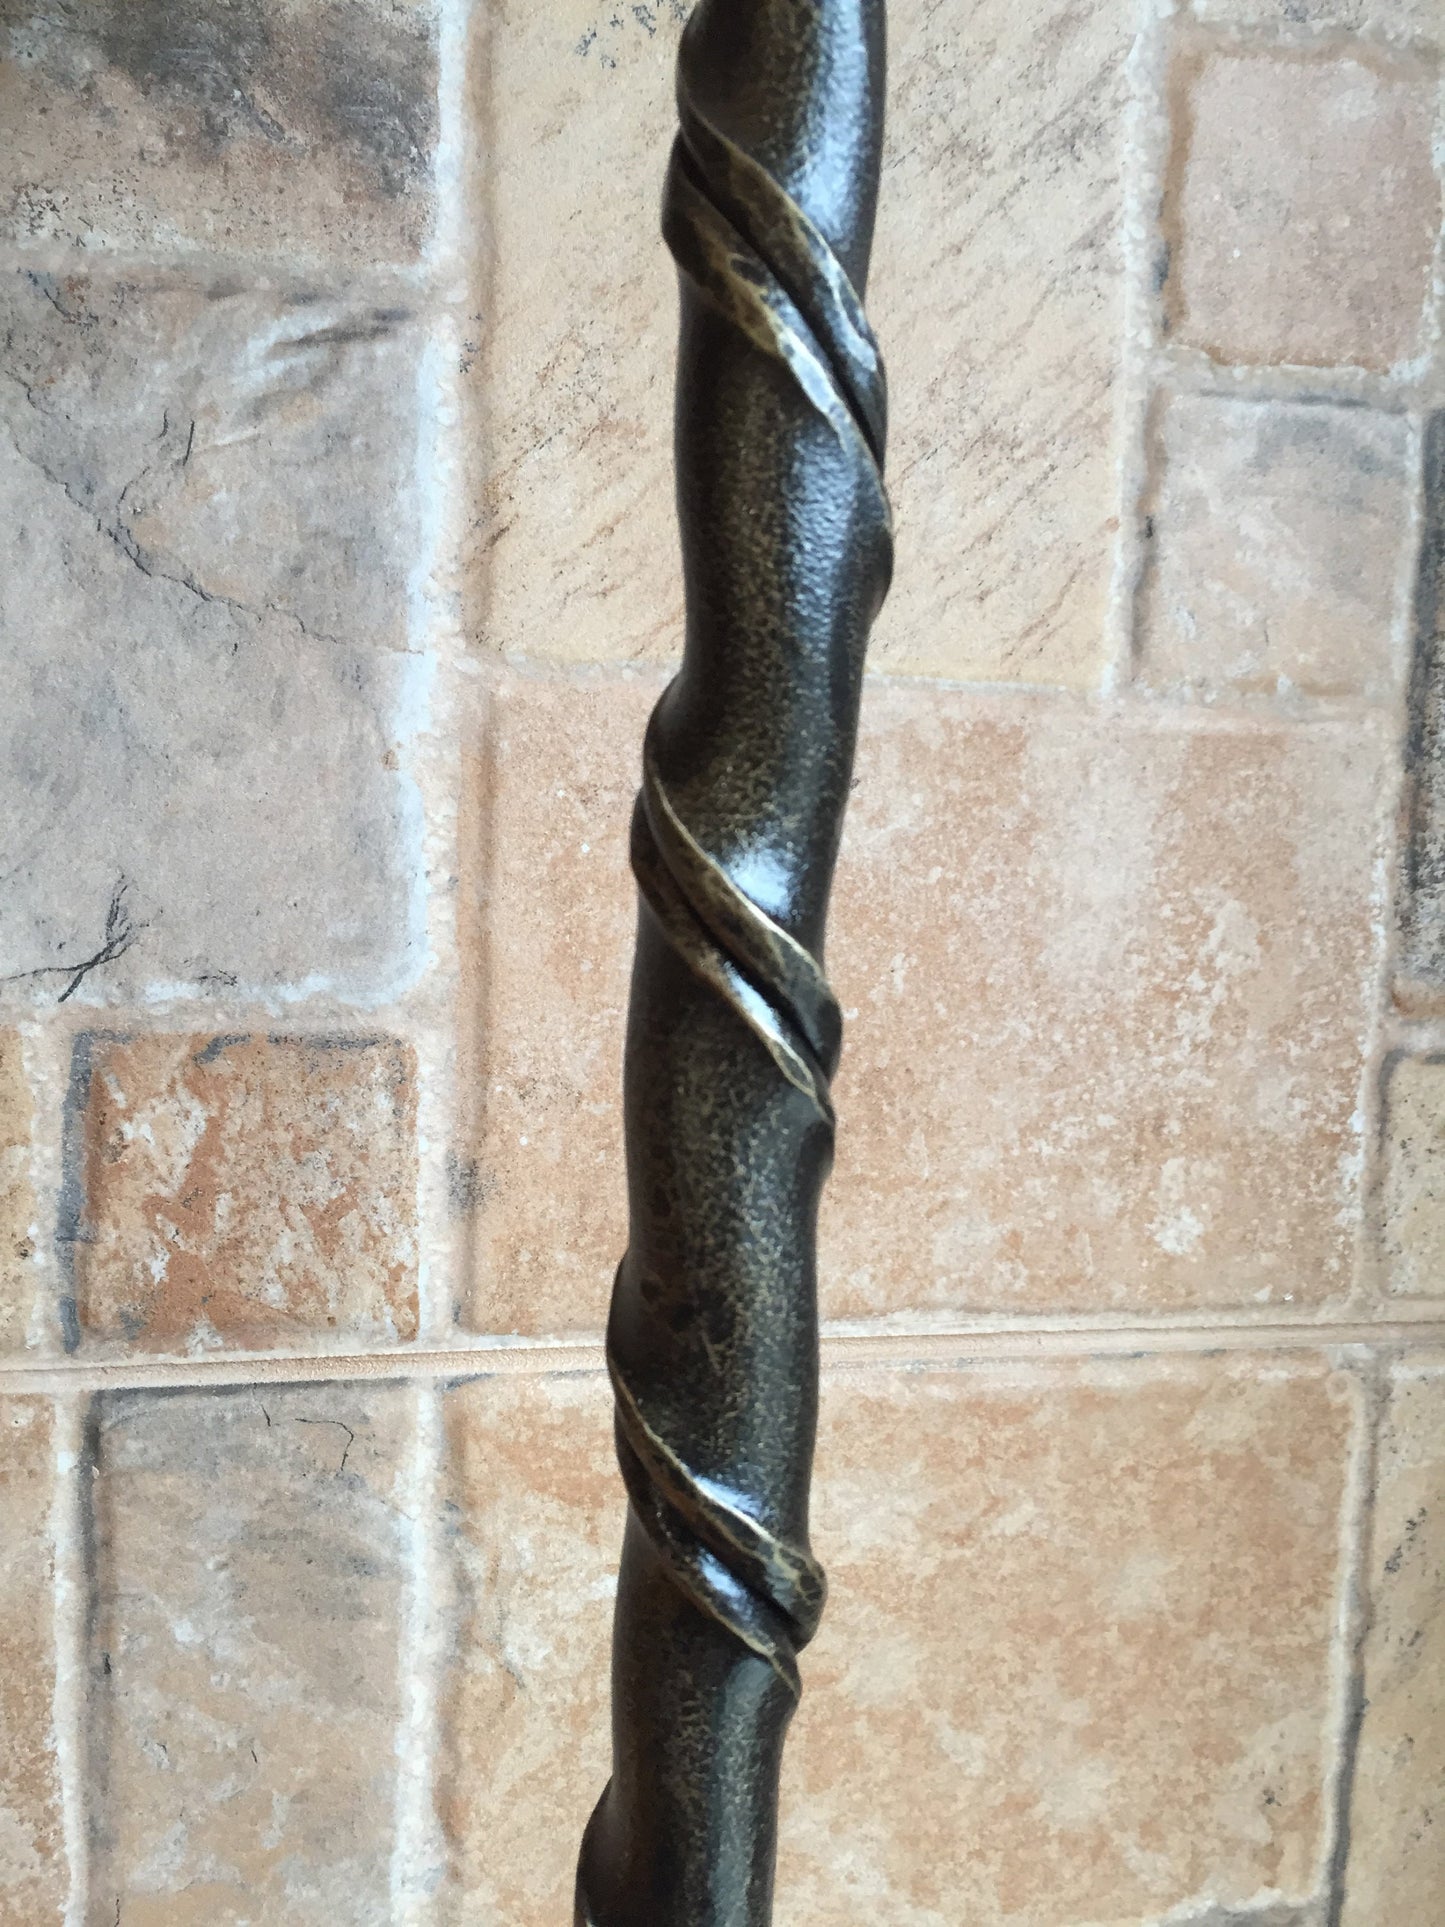 Iron shoehorn, metal shoe horn, hand forged shoe horn, shoe horn, shoes accessories, shoes stuff, insoles, shoes, forged art, metal artwork